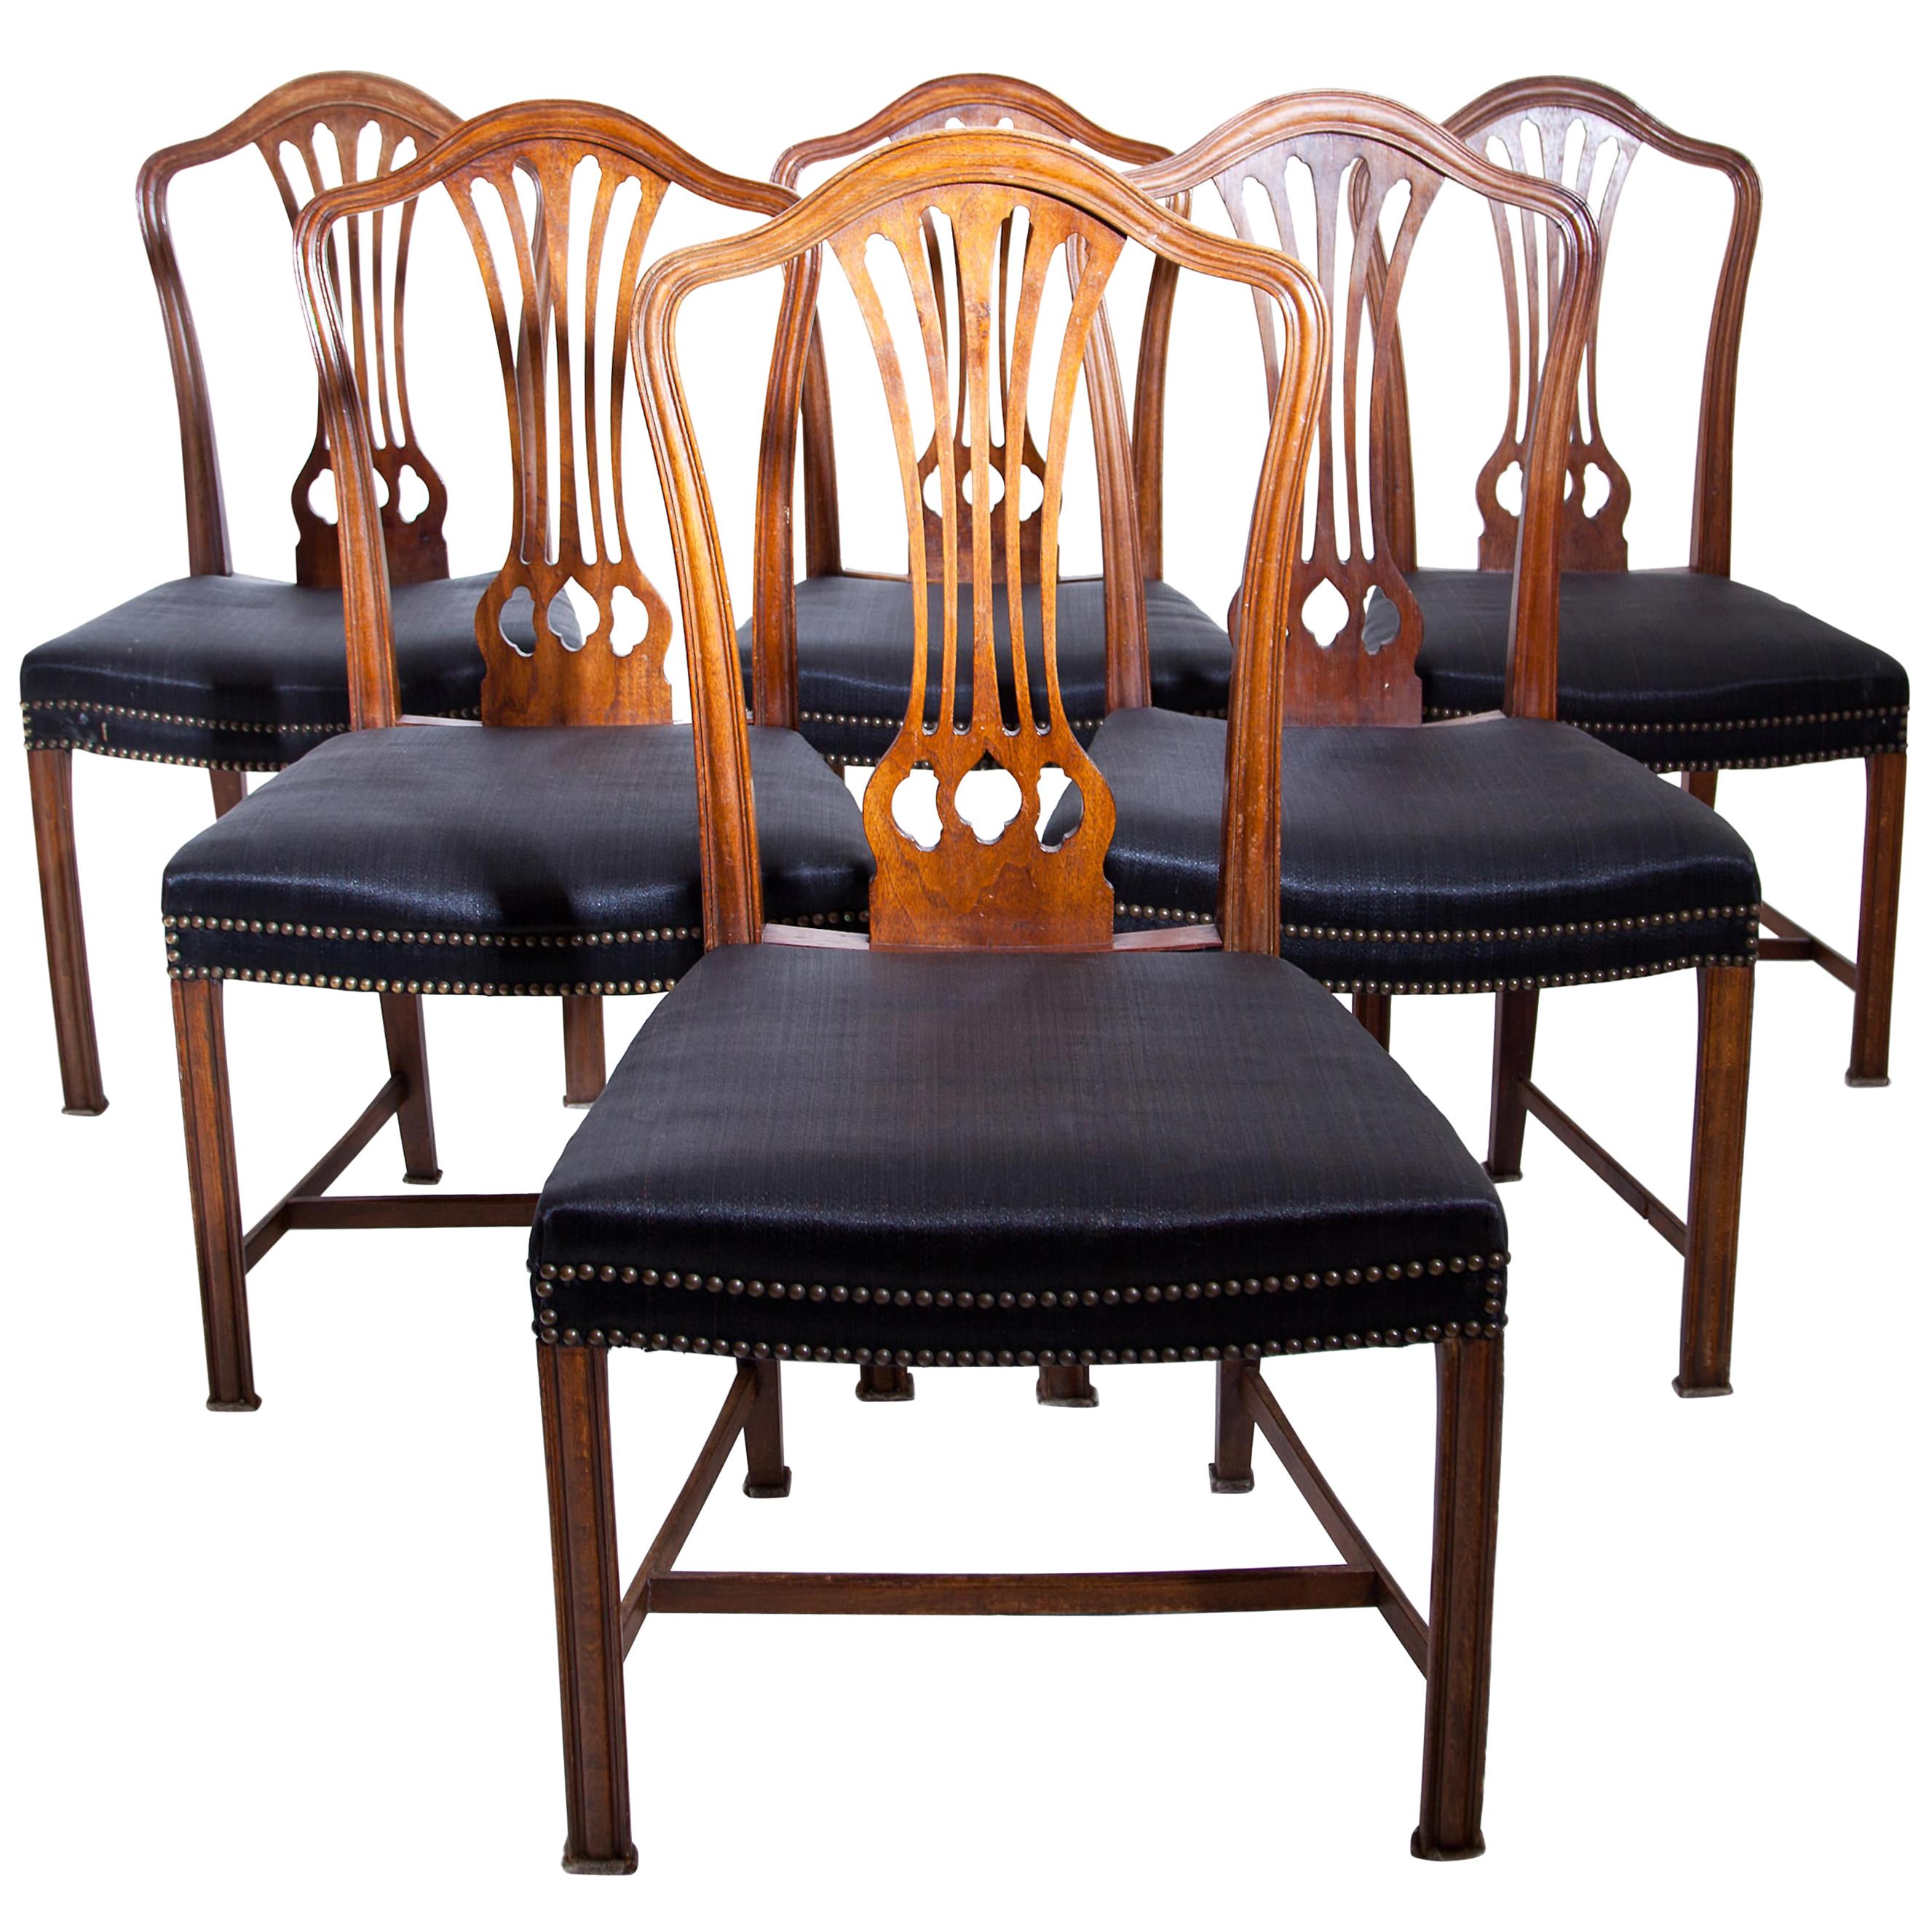 Mahogany Dining Room Chairs after Chippendale, England, circa 1800